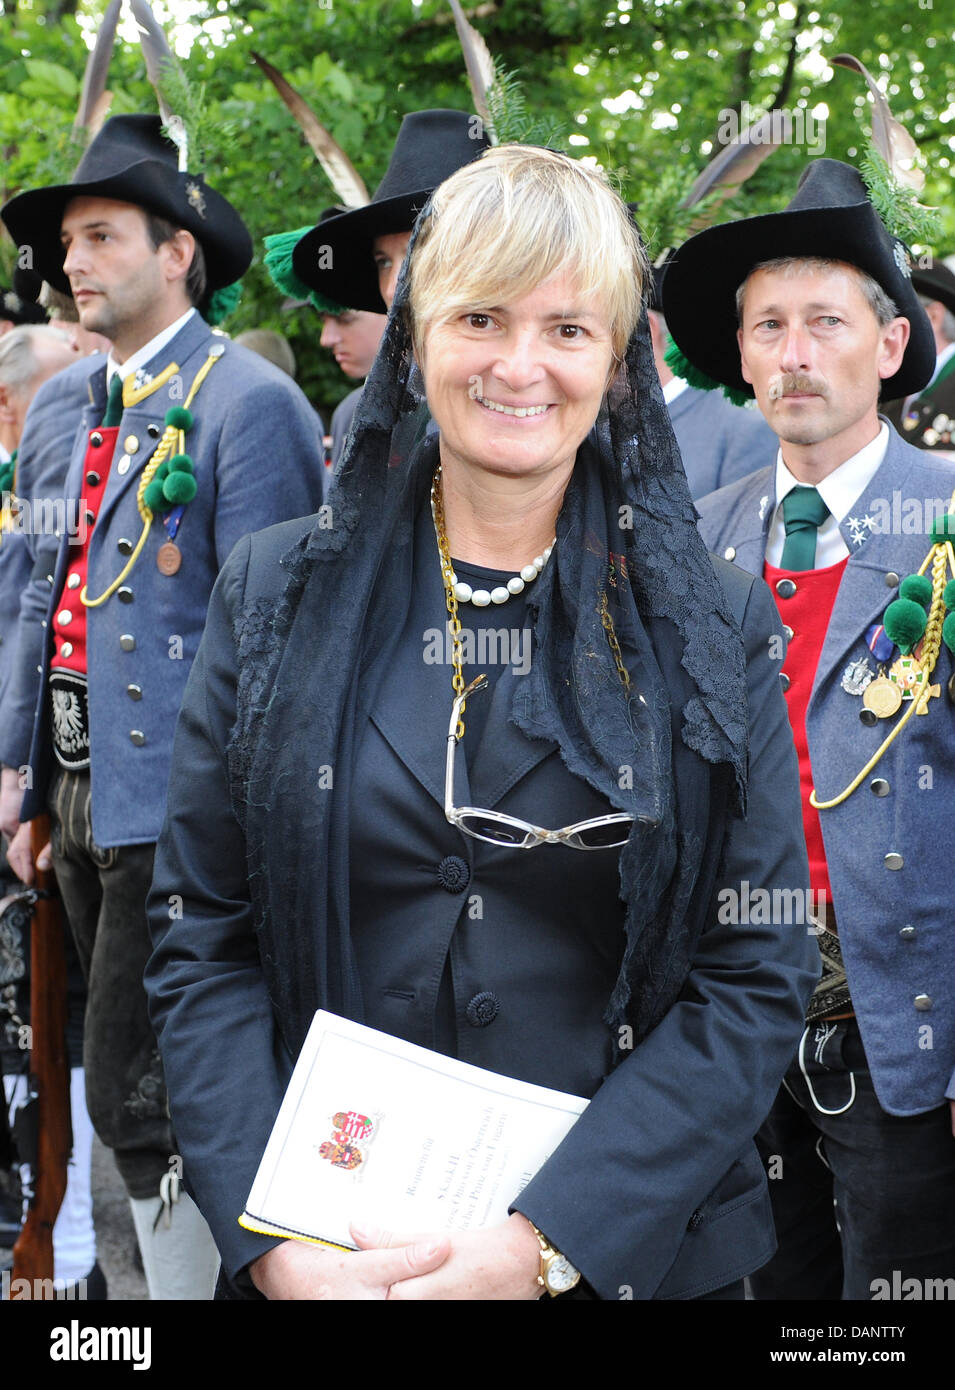 Gloria von Thurn und Taxis attends the requiem service for Otto von Habsburg at St Pius Church in Poecking, Germany, 9 July 2011. Habsburg died at the age of 98 in his house. The requiem is the first of several mourning events for the oldest son of Karl I, the last emperor of Austria and Hungary. Photo: Ursula Dueren Stock Photo